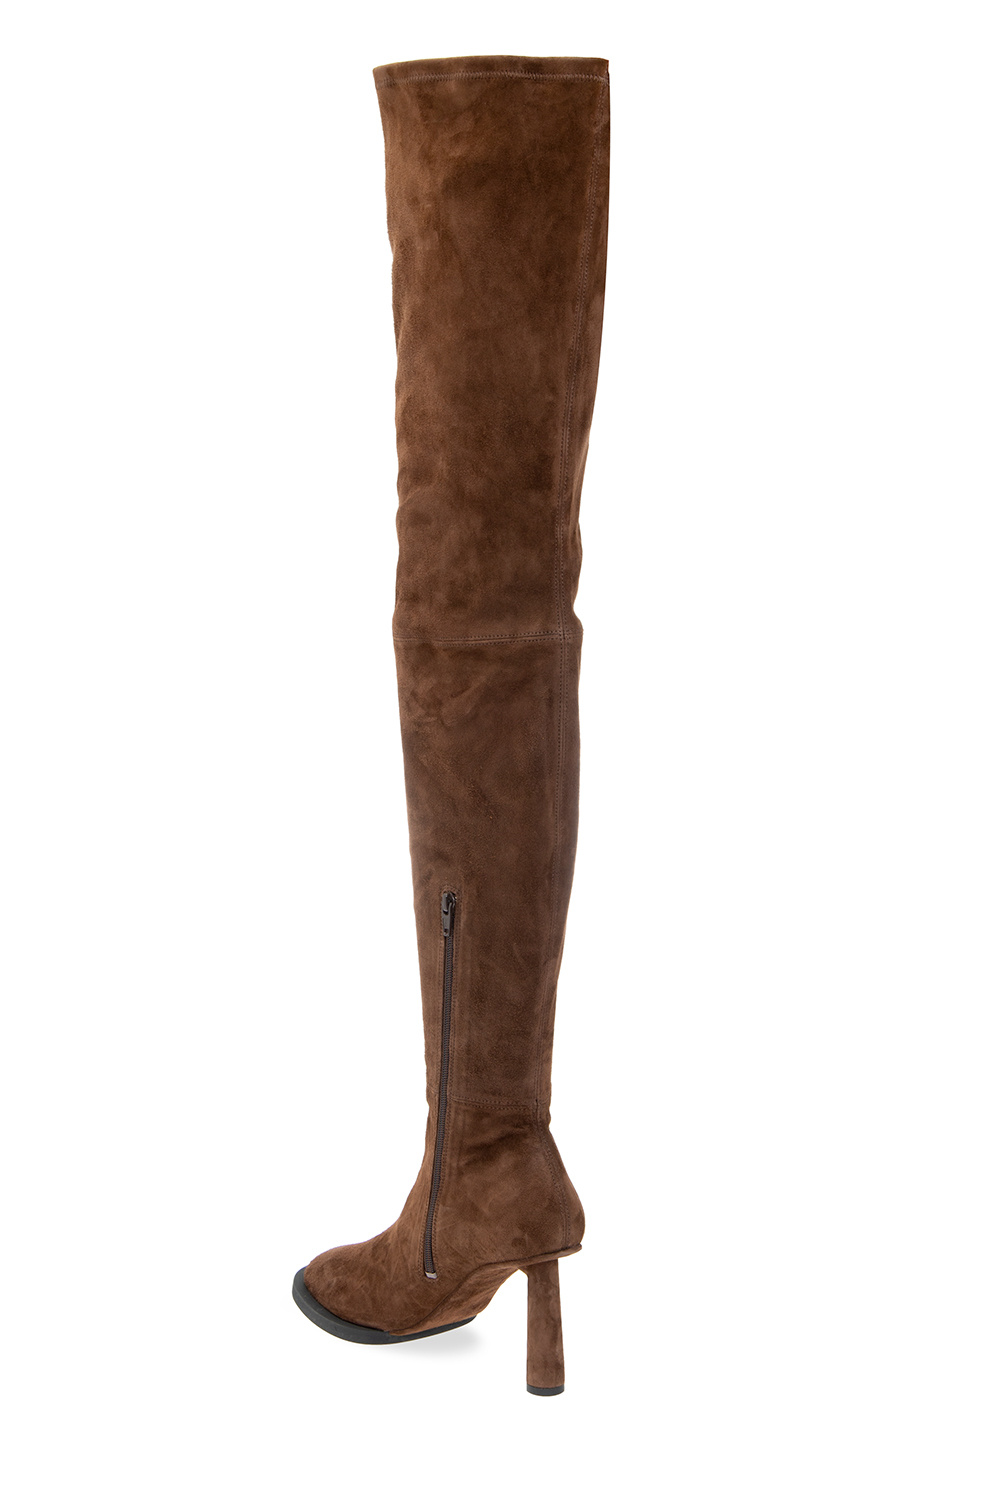 Jacquemus ‘Les’ over-the-knee boots